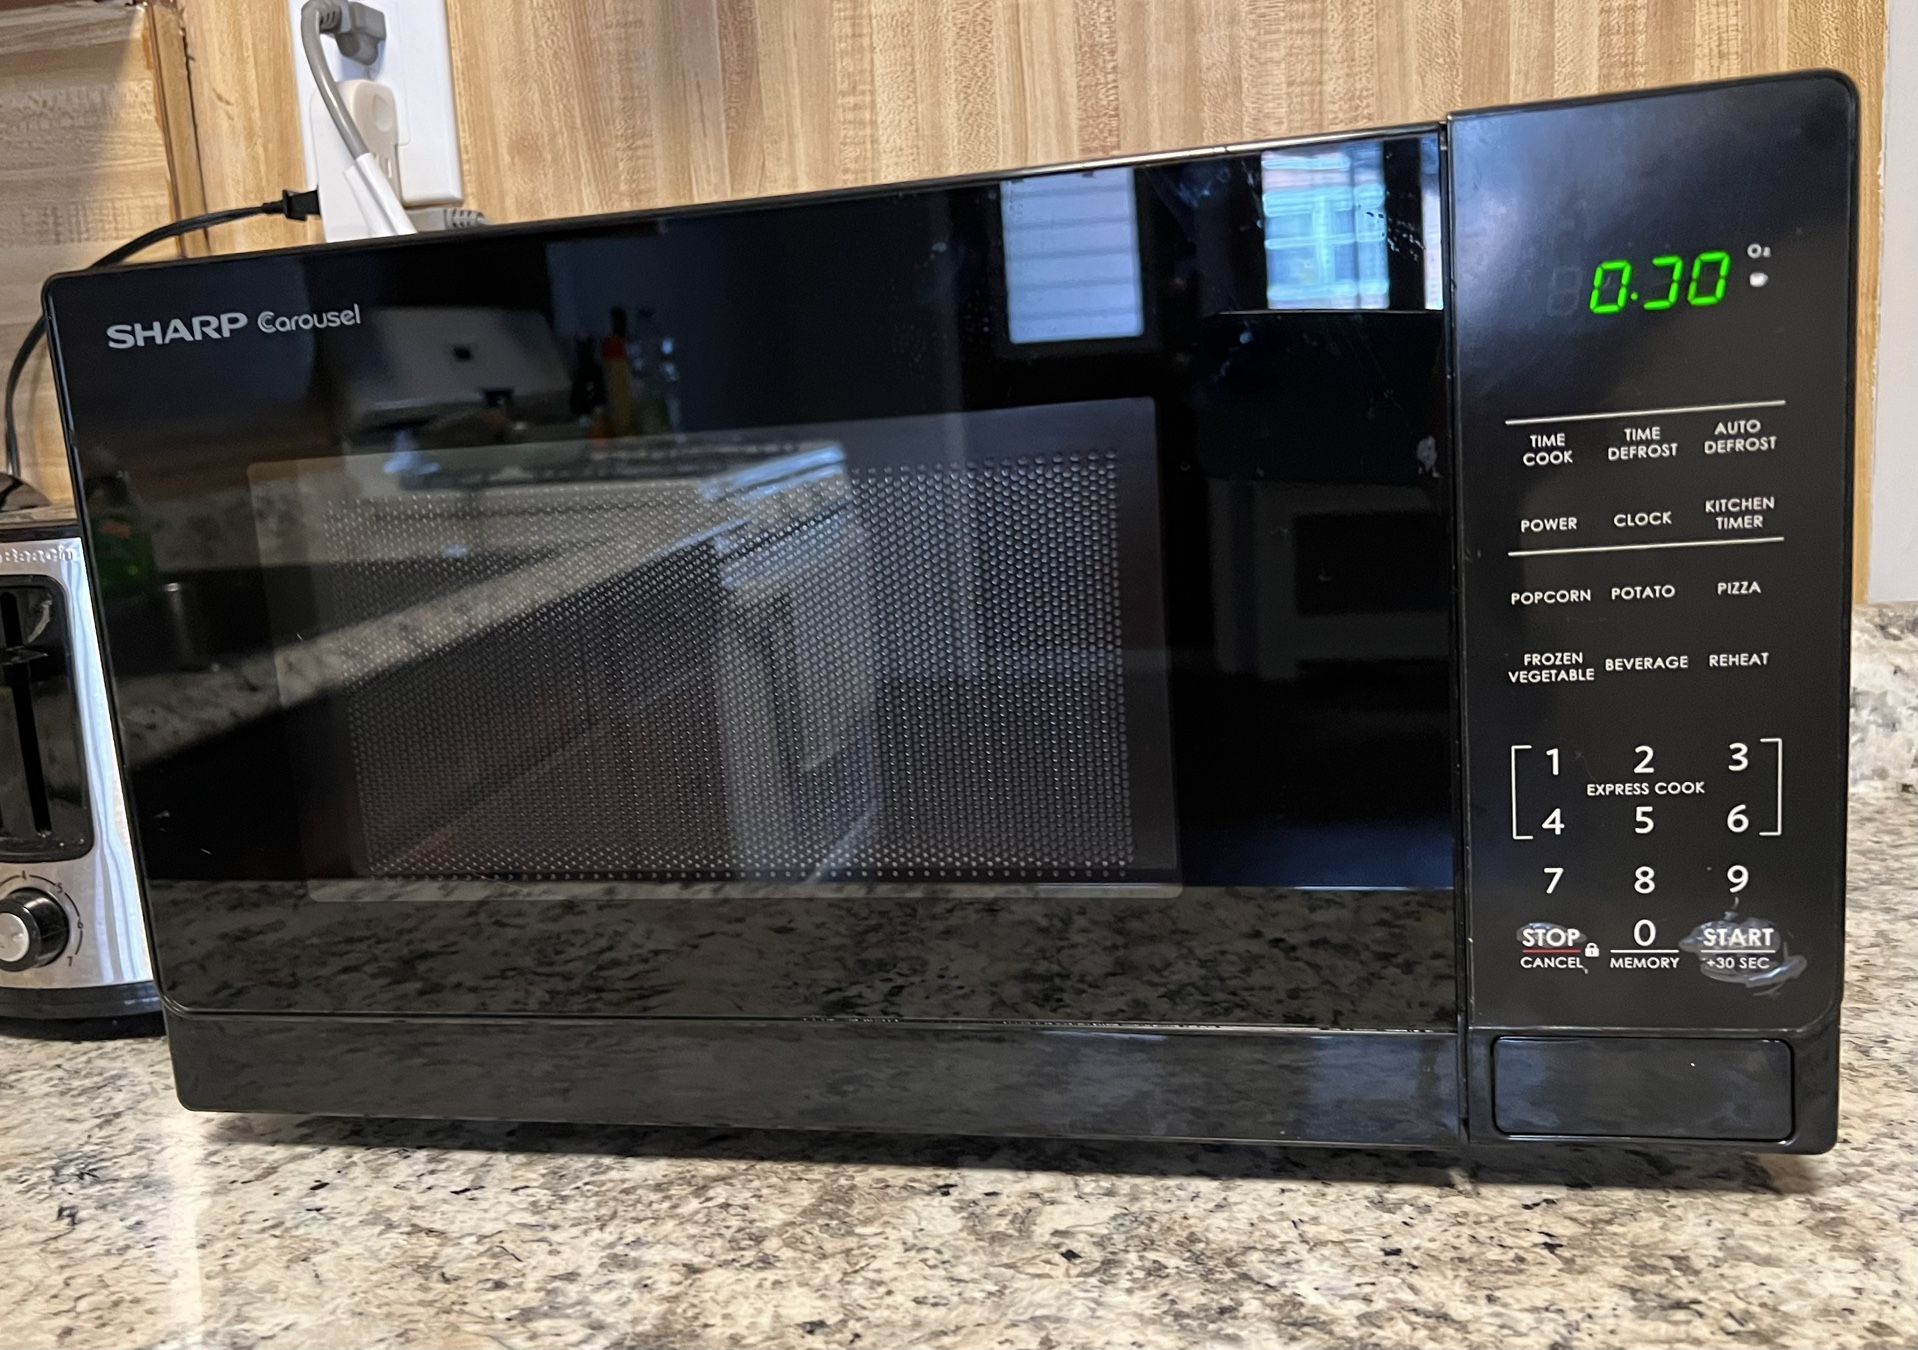 Sunbeam Microwave- $25 IF PICKUP TONIGHT for Sale in Brooklyn, NY